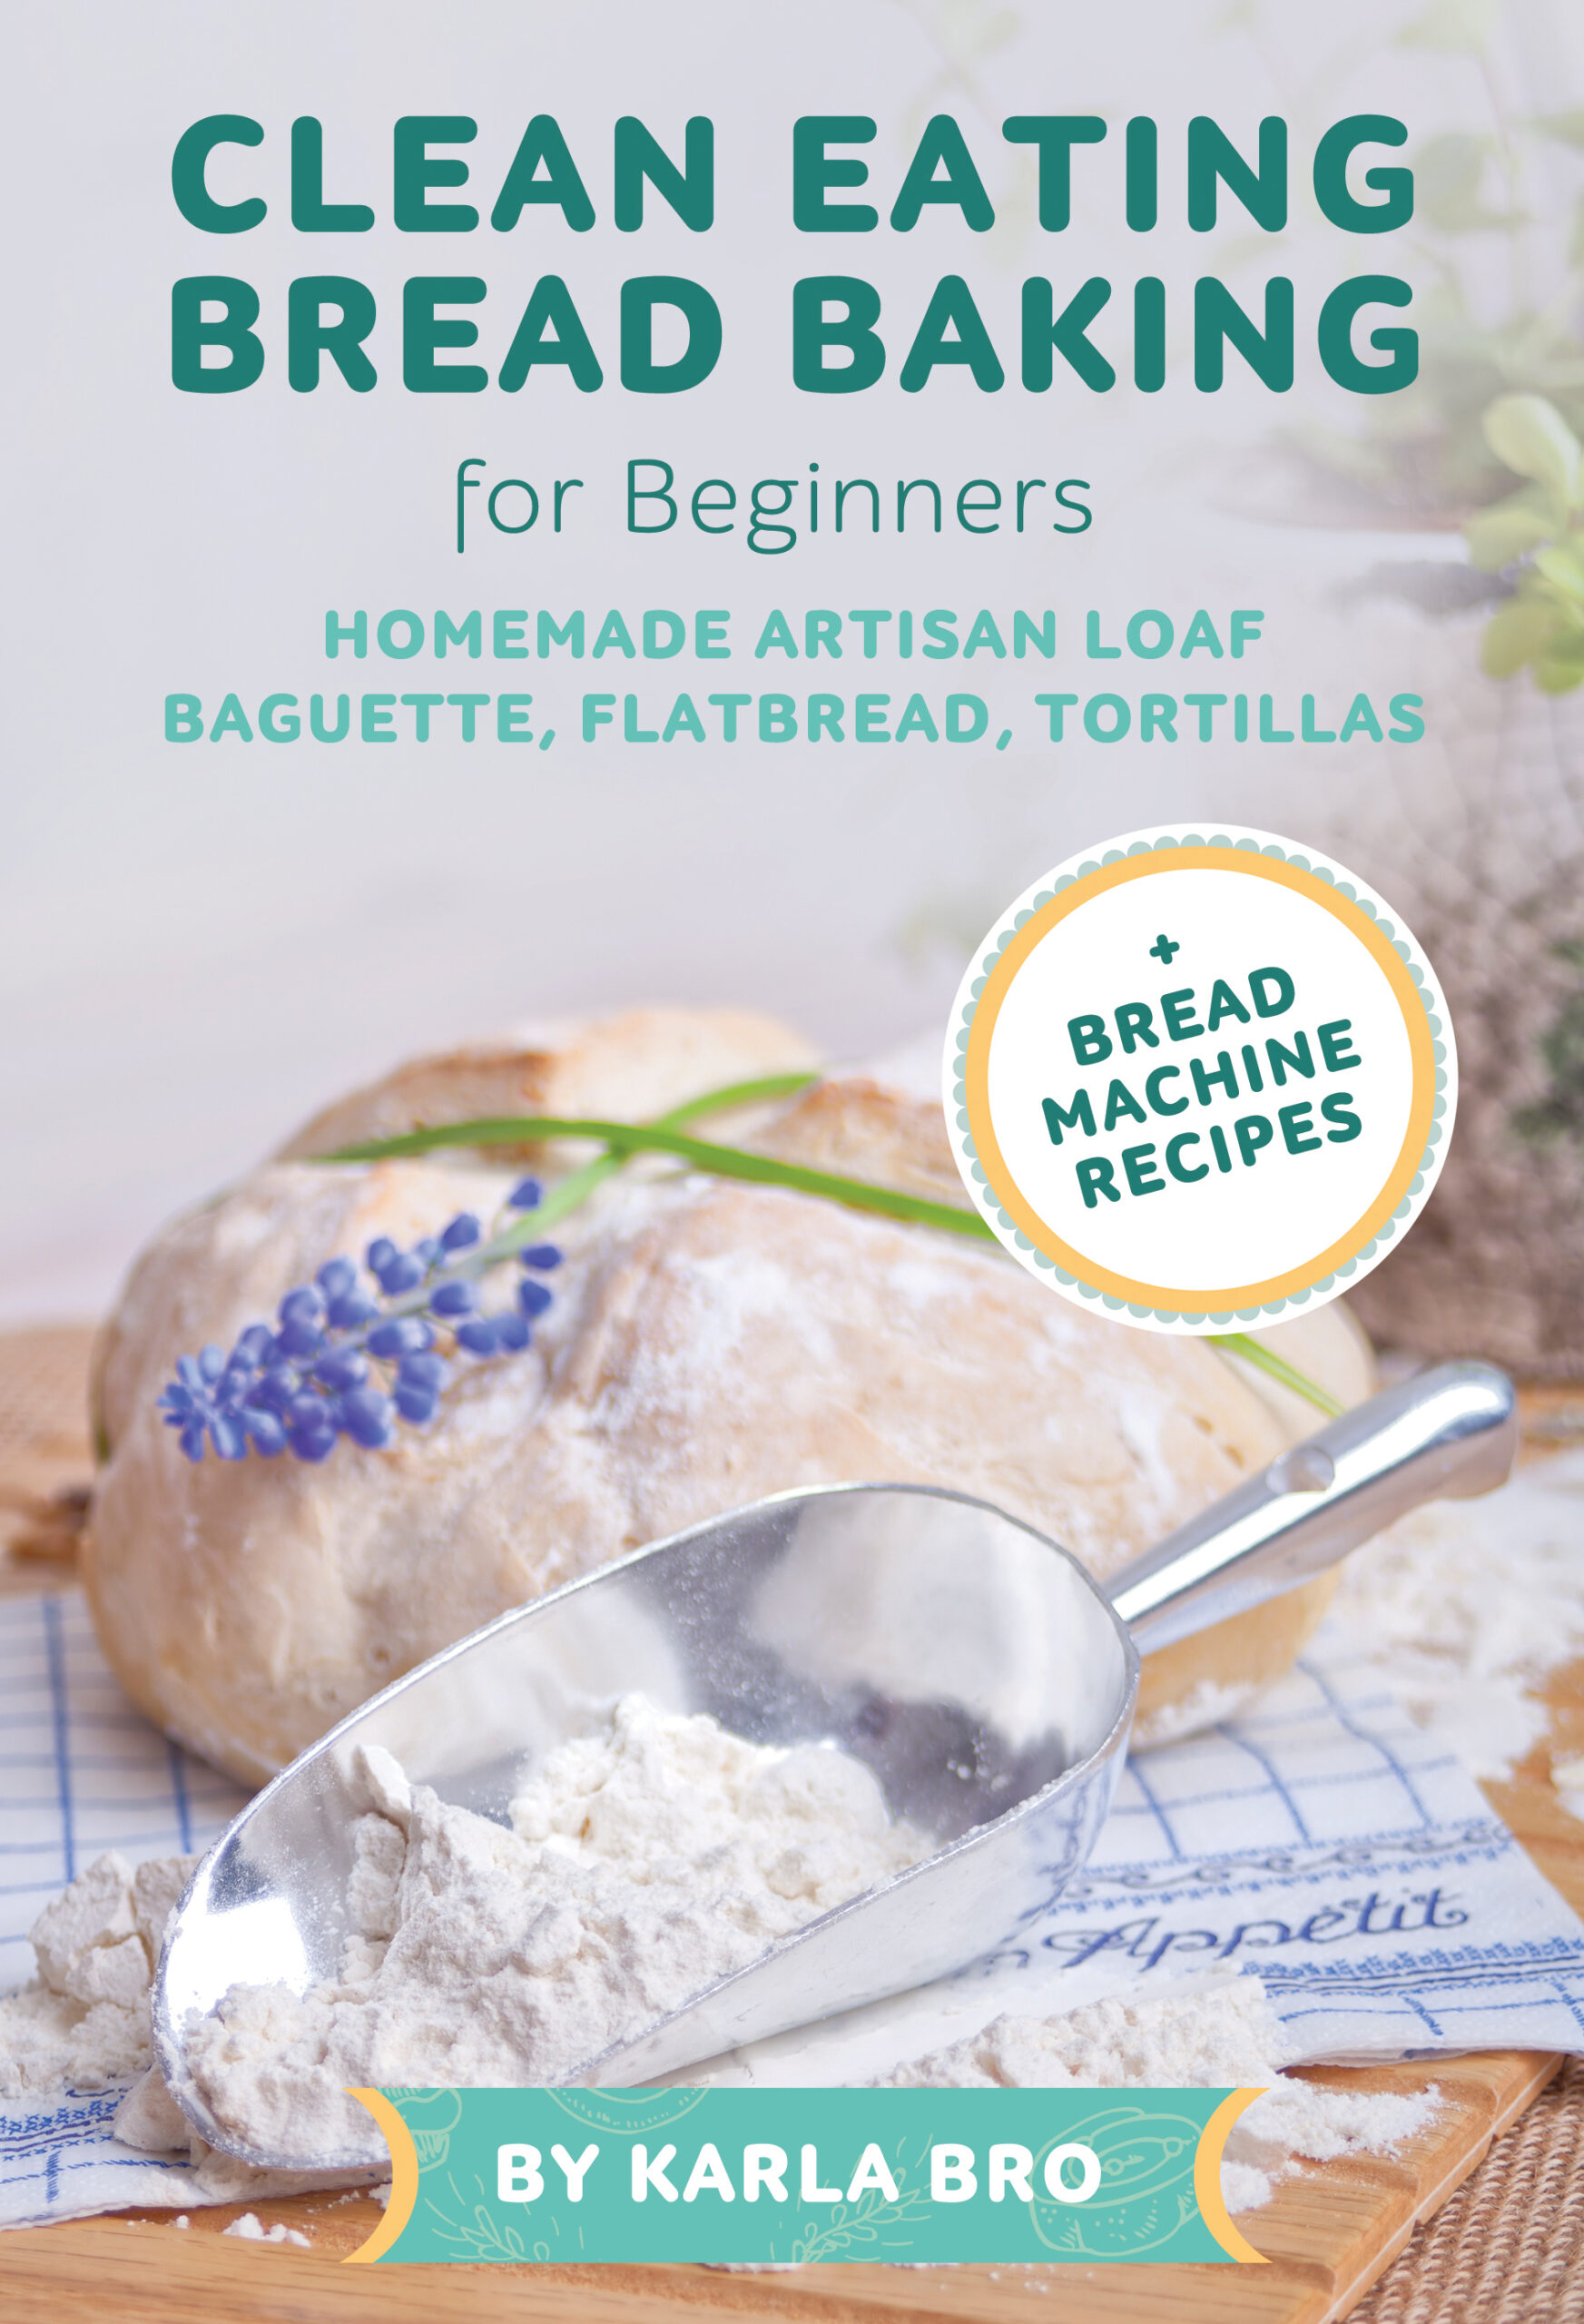 FREE: Clean Eating Bread Baking for Beginners: Homemade Artisan Loaf, Baguette, Flatbread, Tortillas. + Bread Machine Recipes by Karla Bro